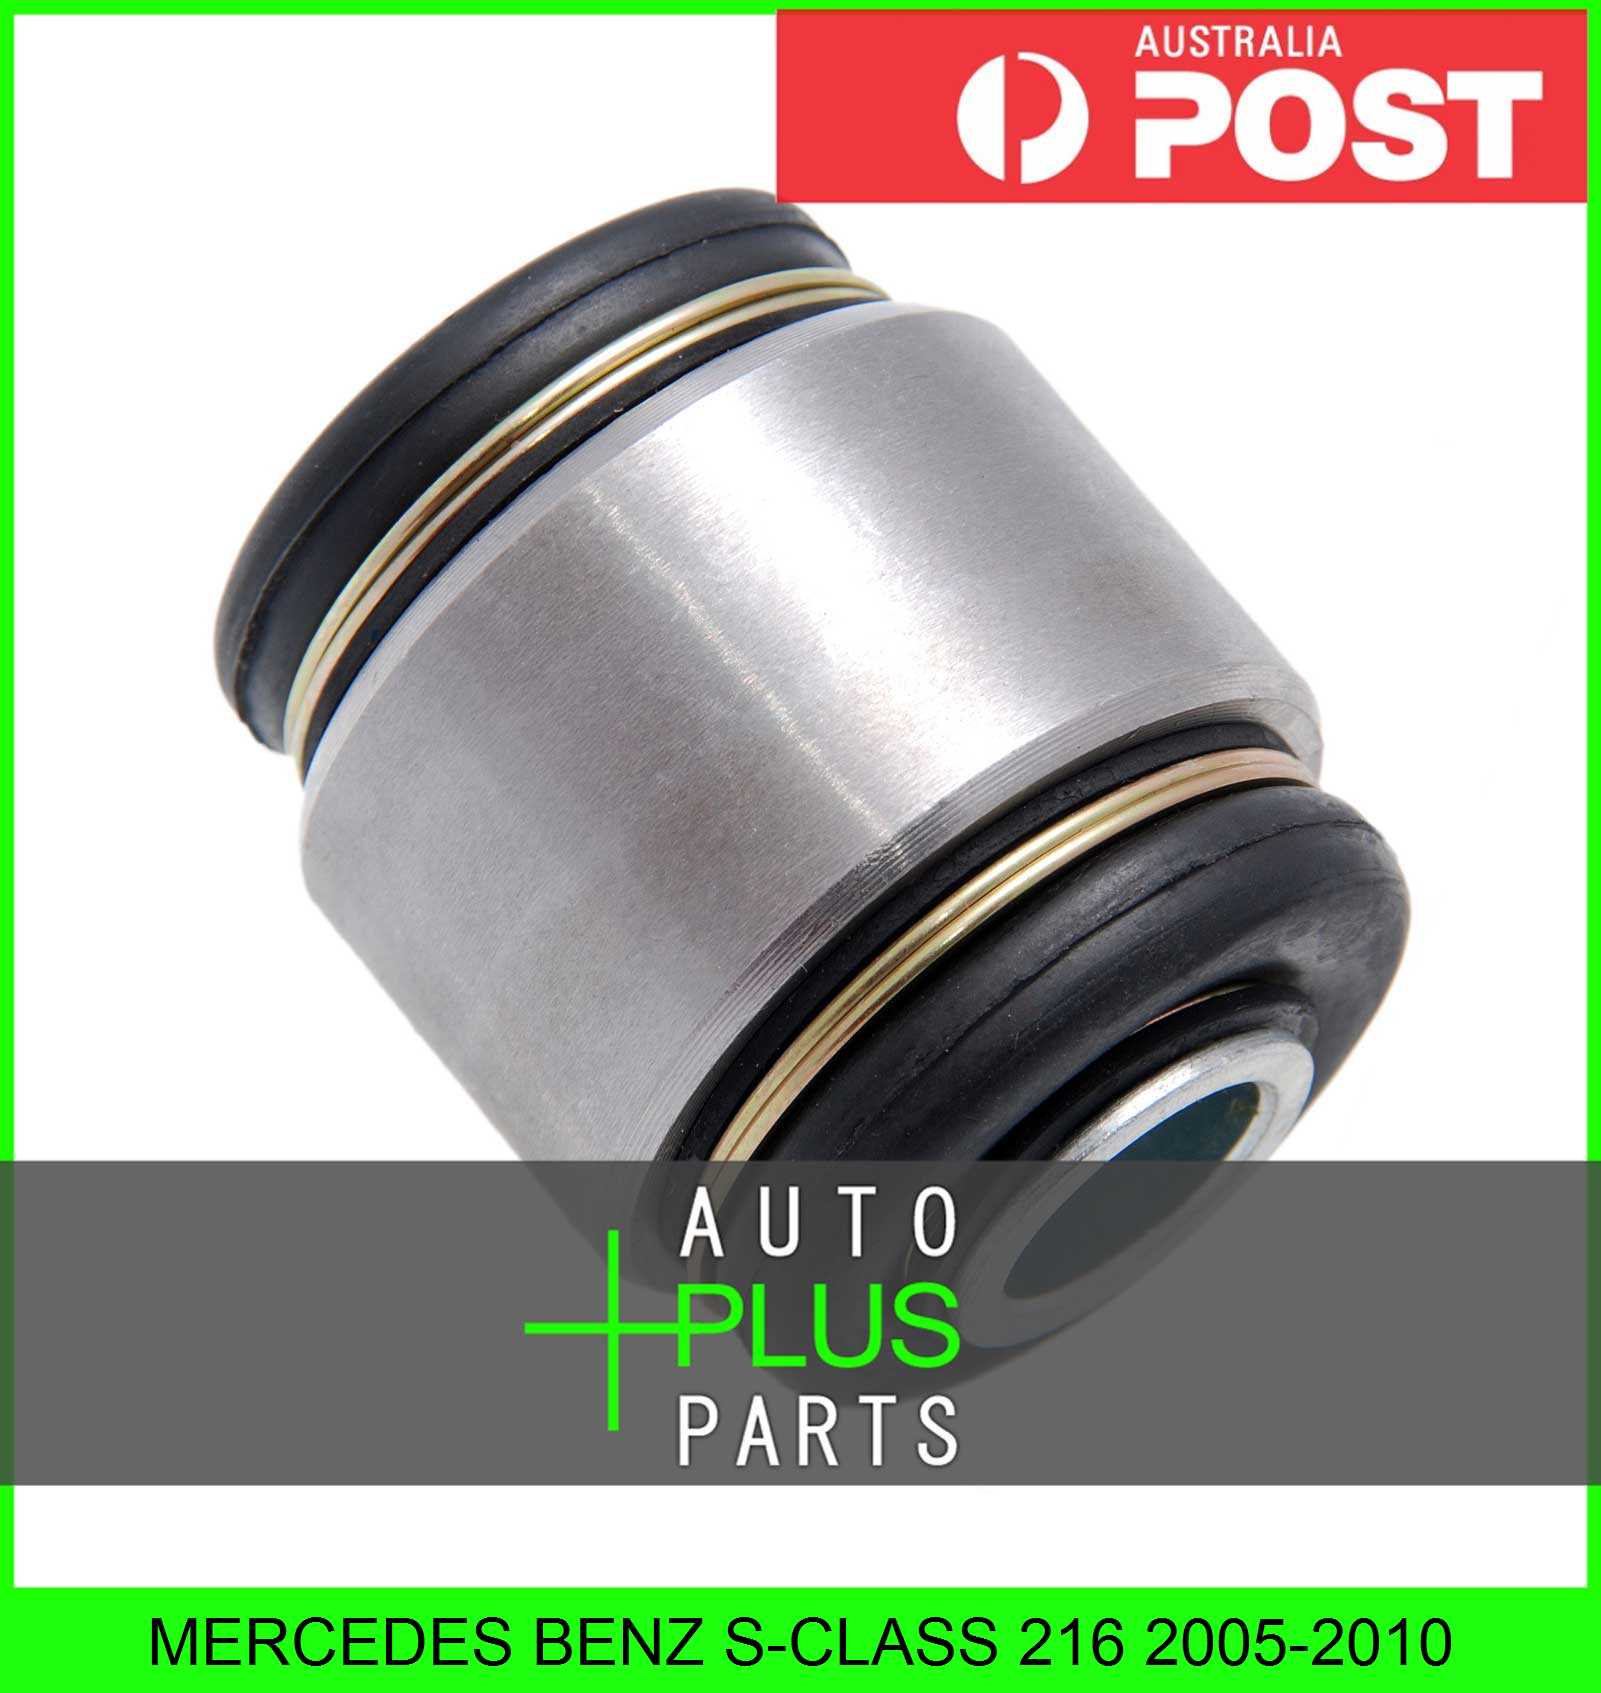 Fits MERCEDES BENZ S-CLASS 216 - Bush For Rear Axle Knuckle Hub Assembly Rubber Product Photo